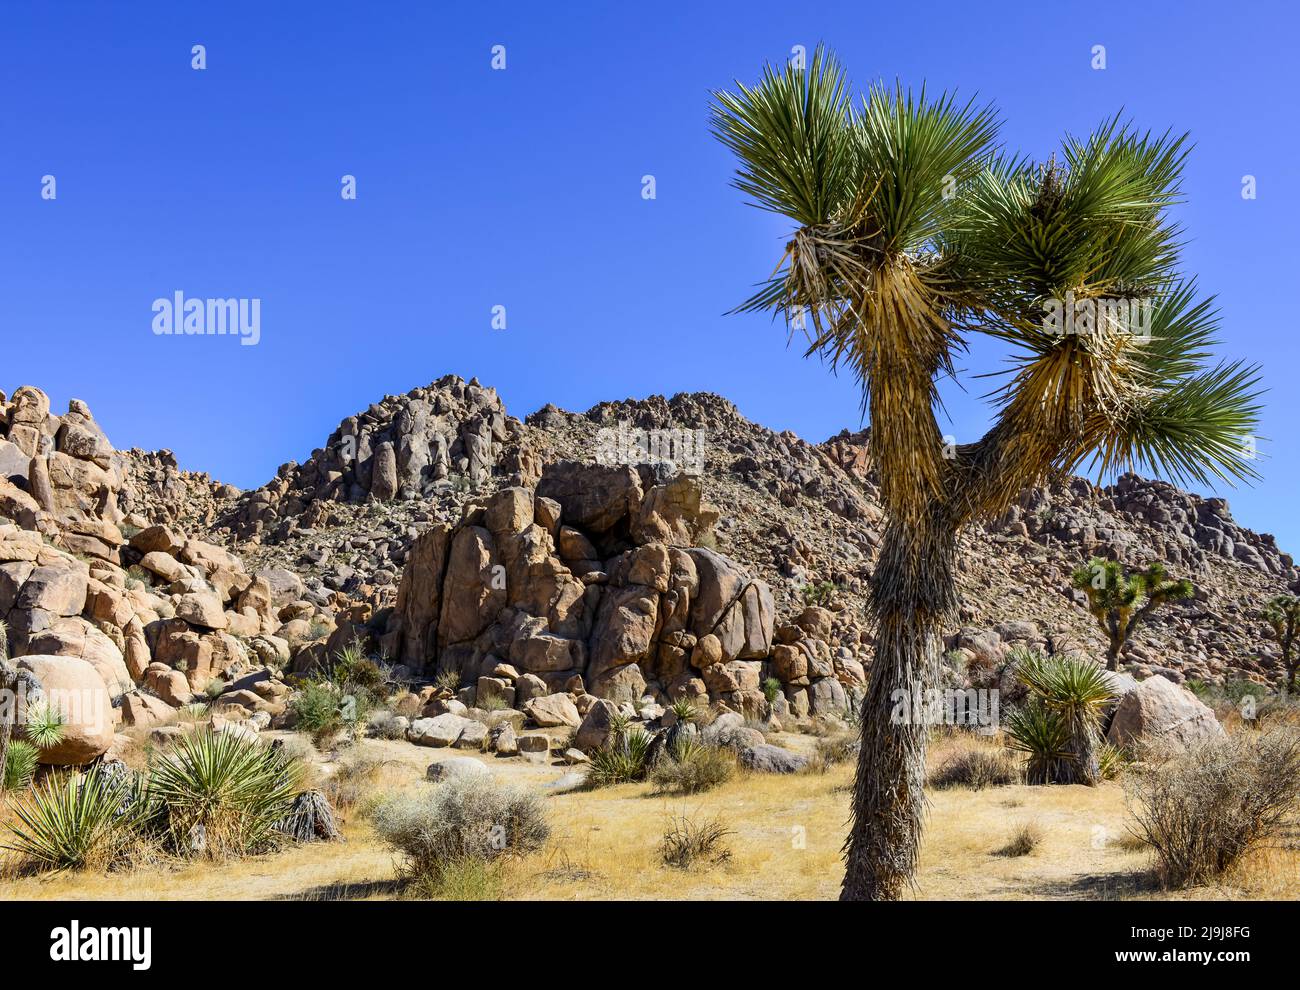 The unique Joshua tree with it's bearded- trunk and spiky leaves in the rocks & boulders of the Joshua Tree National Park, in the Mojave desert, CA Stock Photo